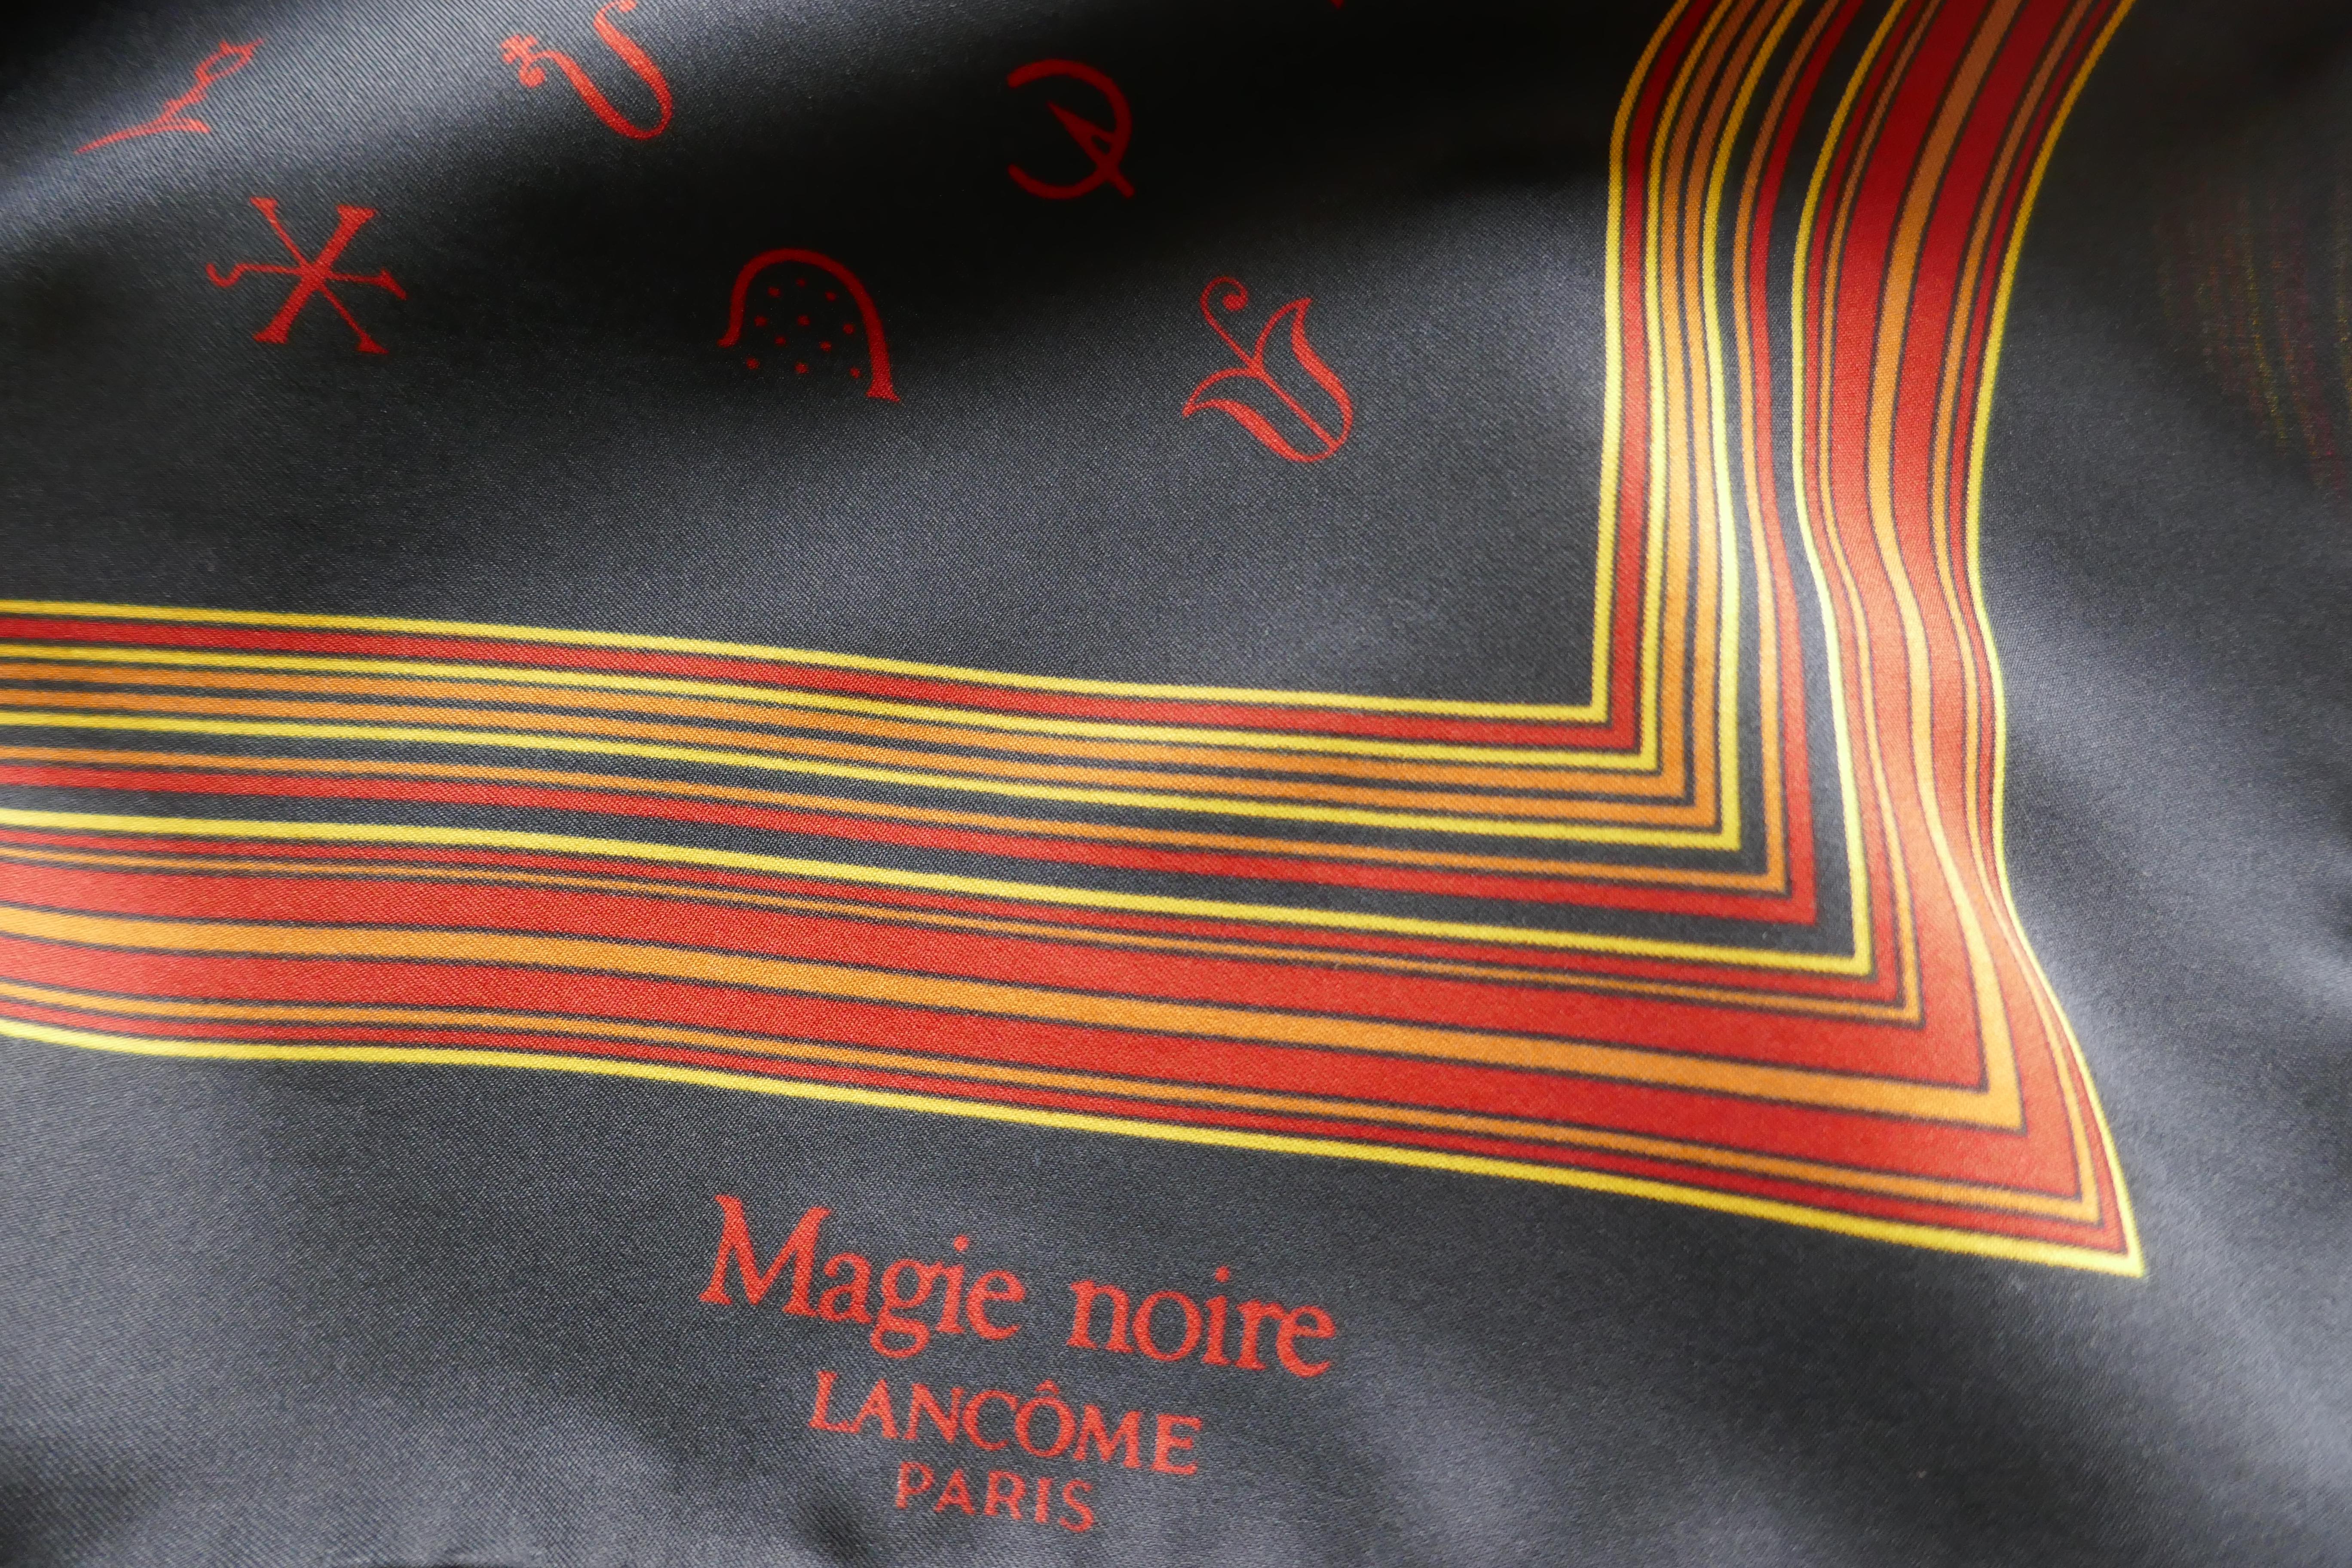 Large Square Scarf, Magie Noire for Lancôme Paris

Black magic symbols in red on a black background, with a bright red and orange striped border
A lovely scarf in unworn condition, Very rare one for the collector 
Polyester 
The Scarf is 31”x